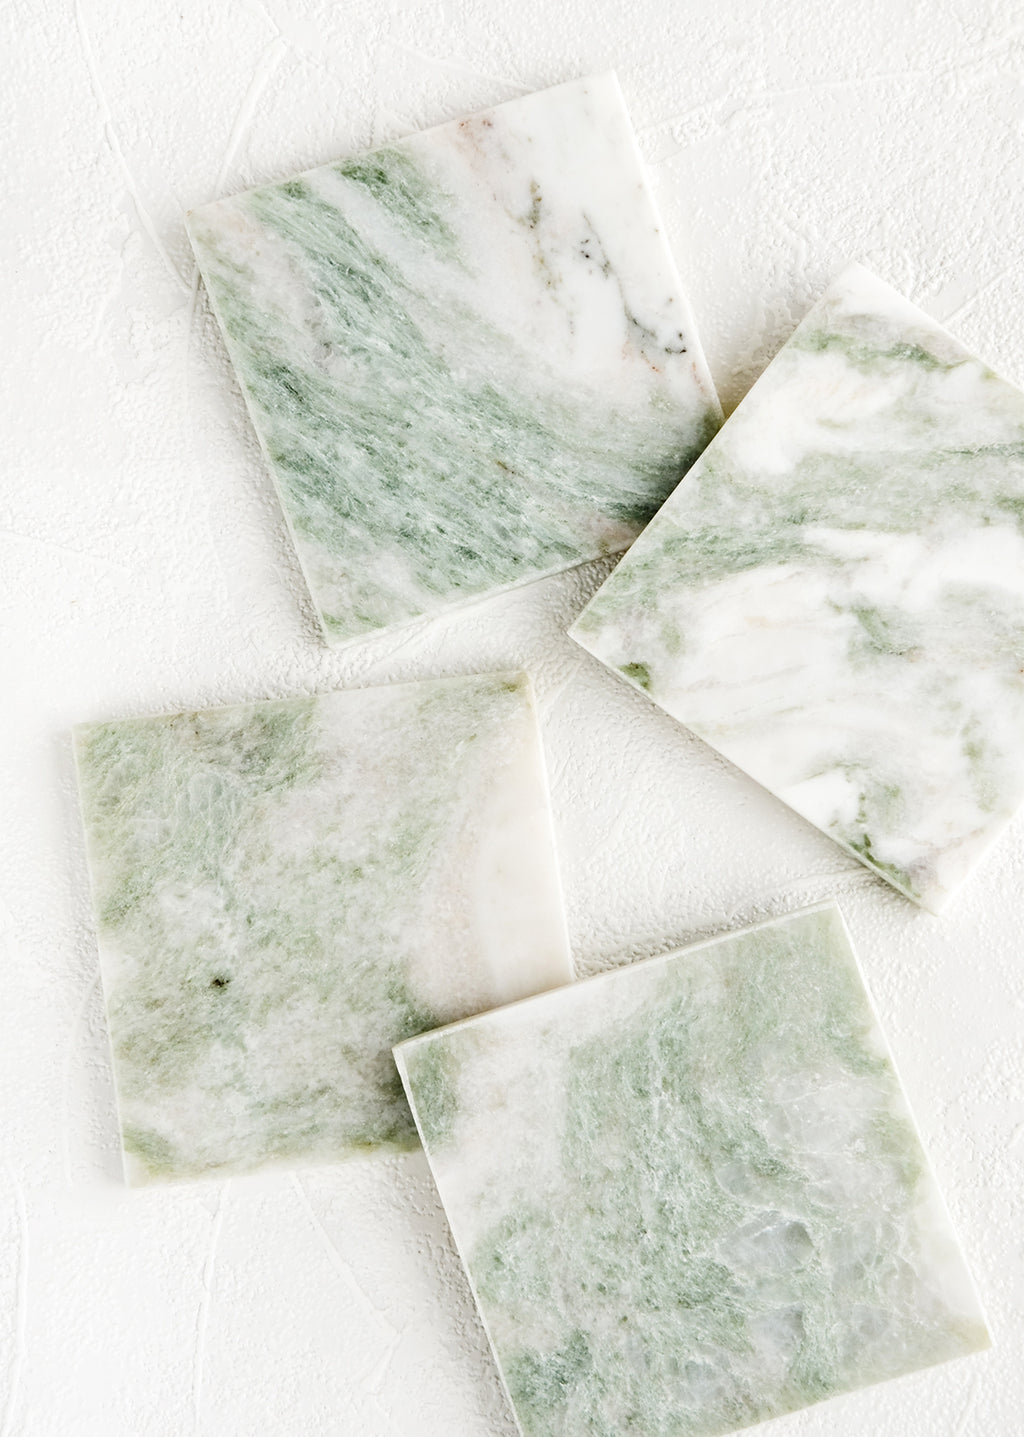 Square: Set of 4 square coasters in green and white marbled "lady onyx"